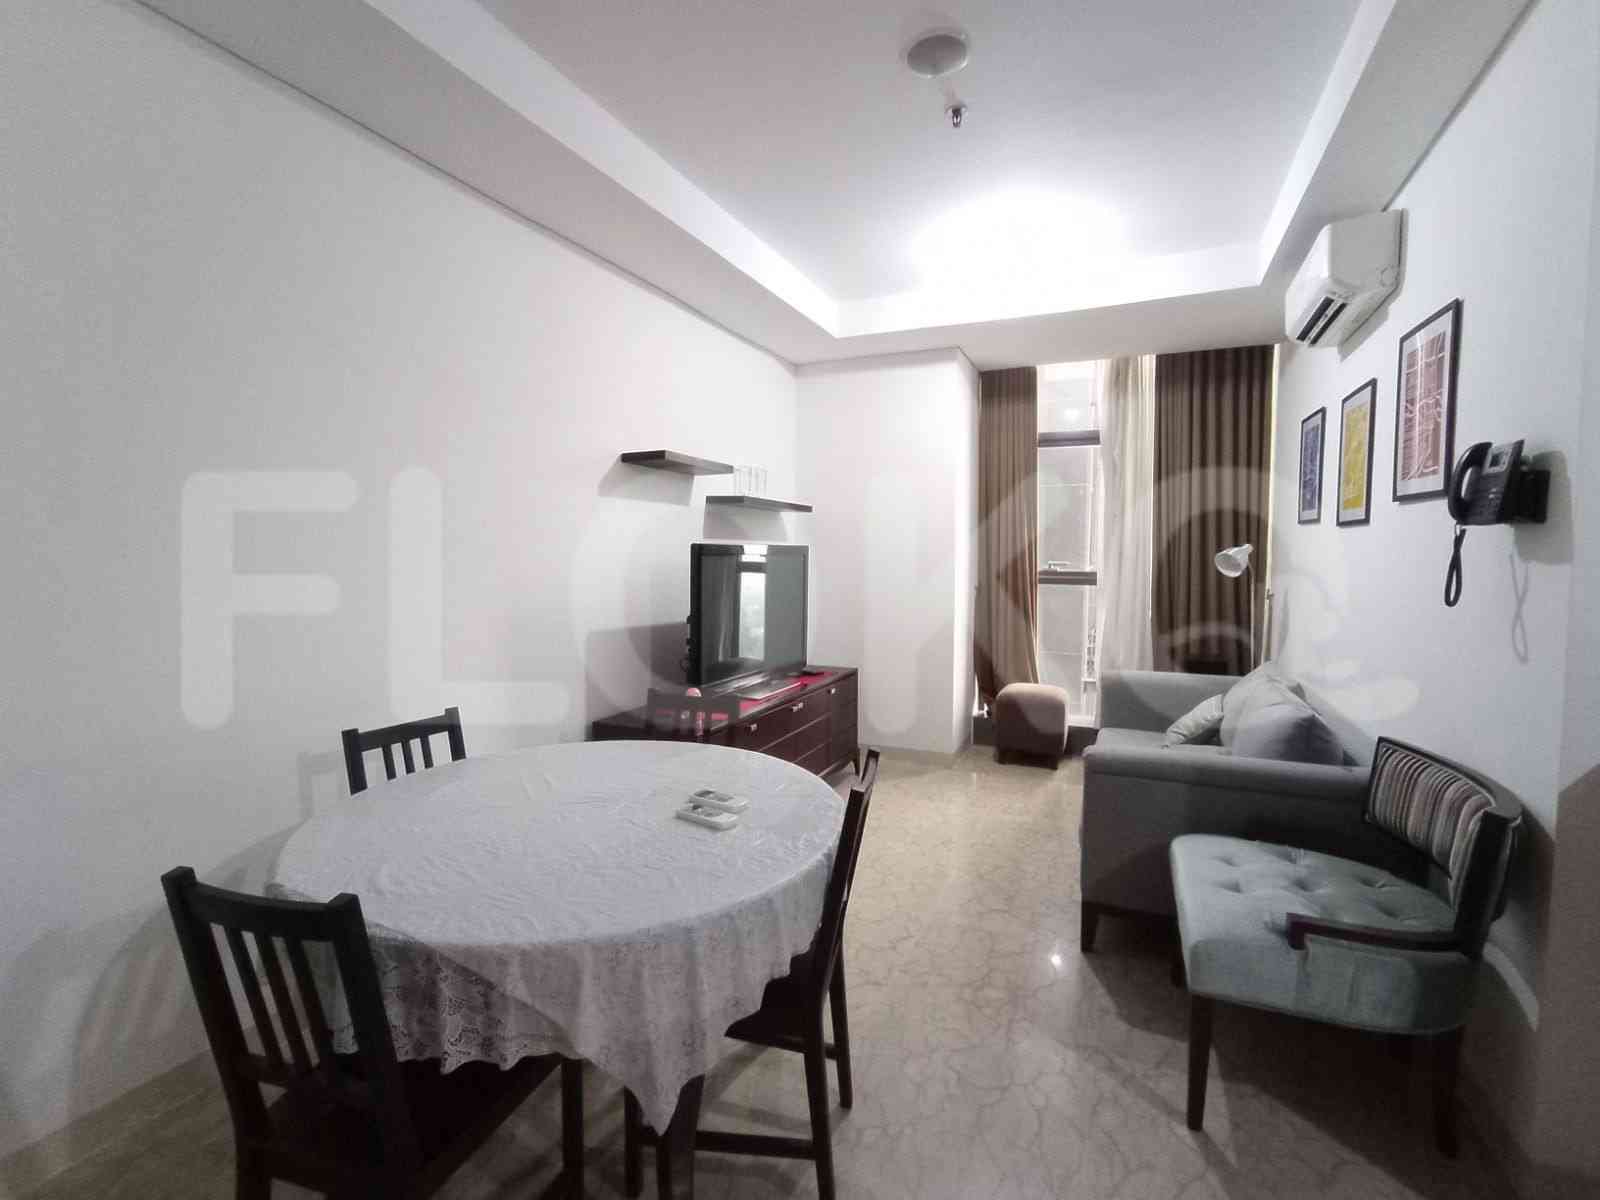 2 Bedroom on 8th Floor for Rent in Lavanue Apartment - fpad34 5